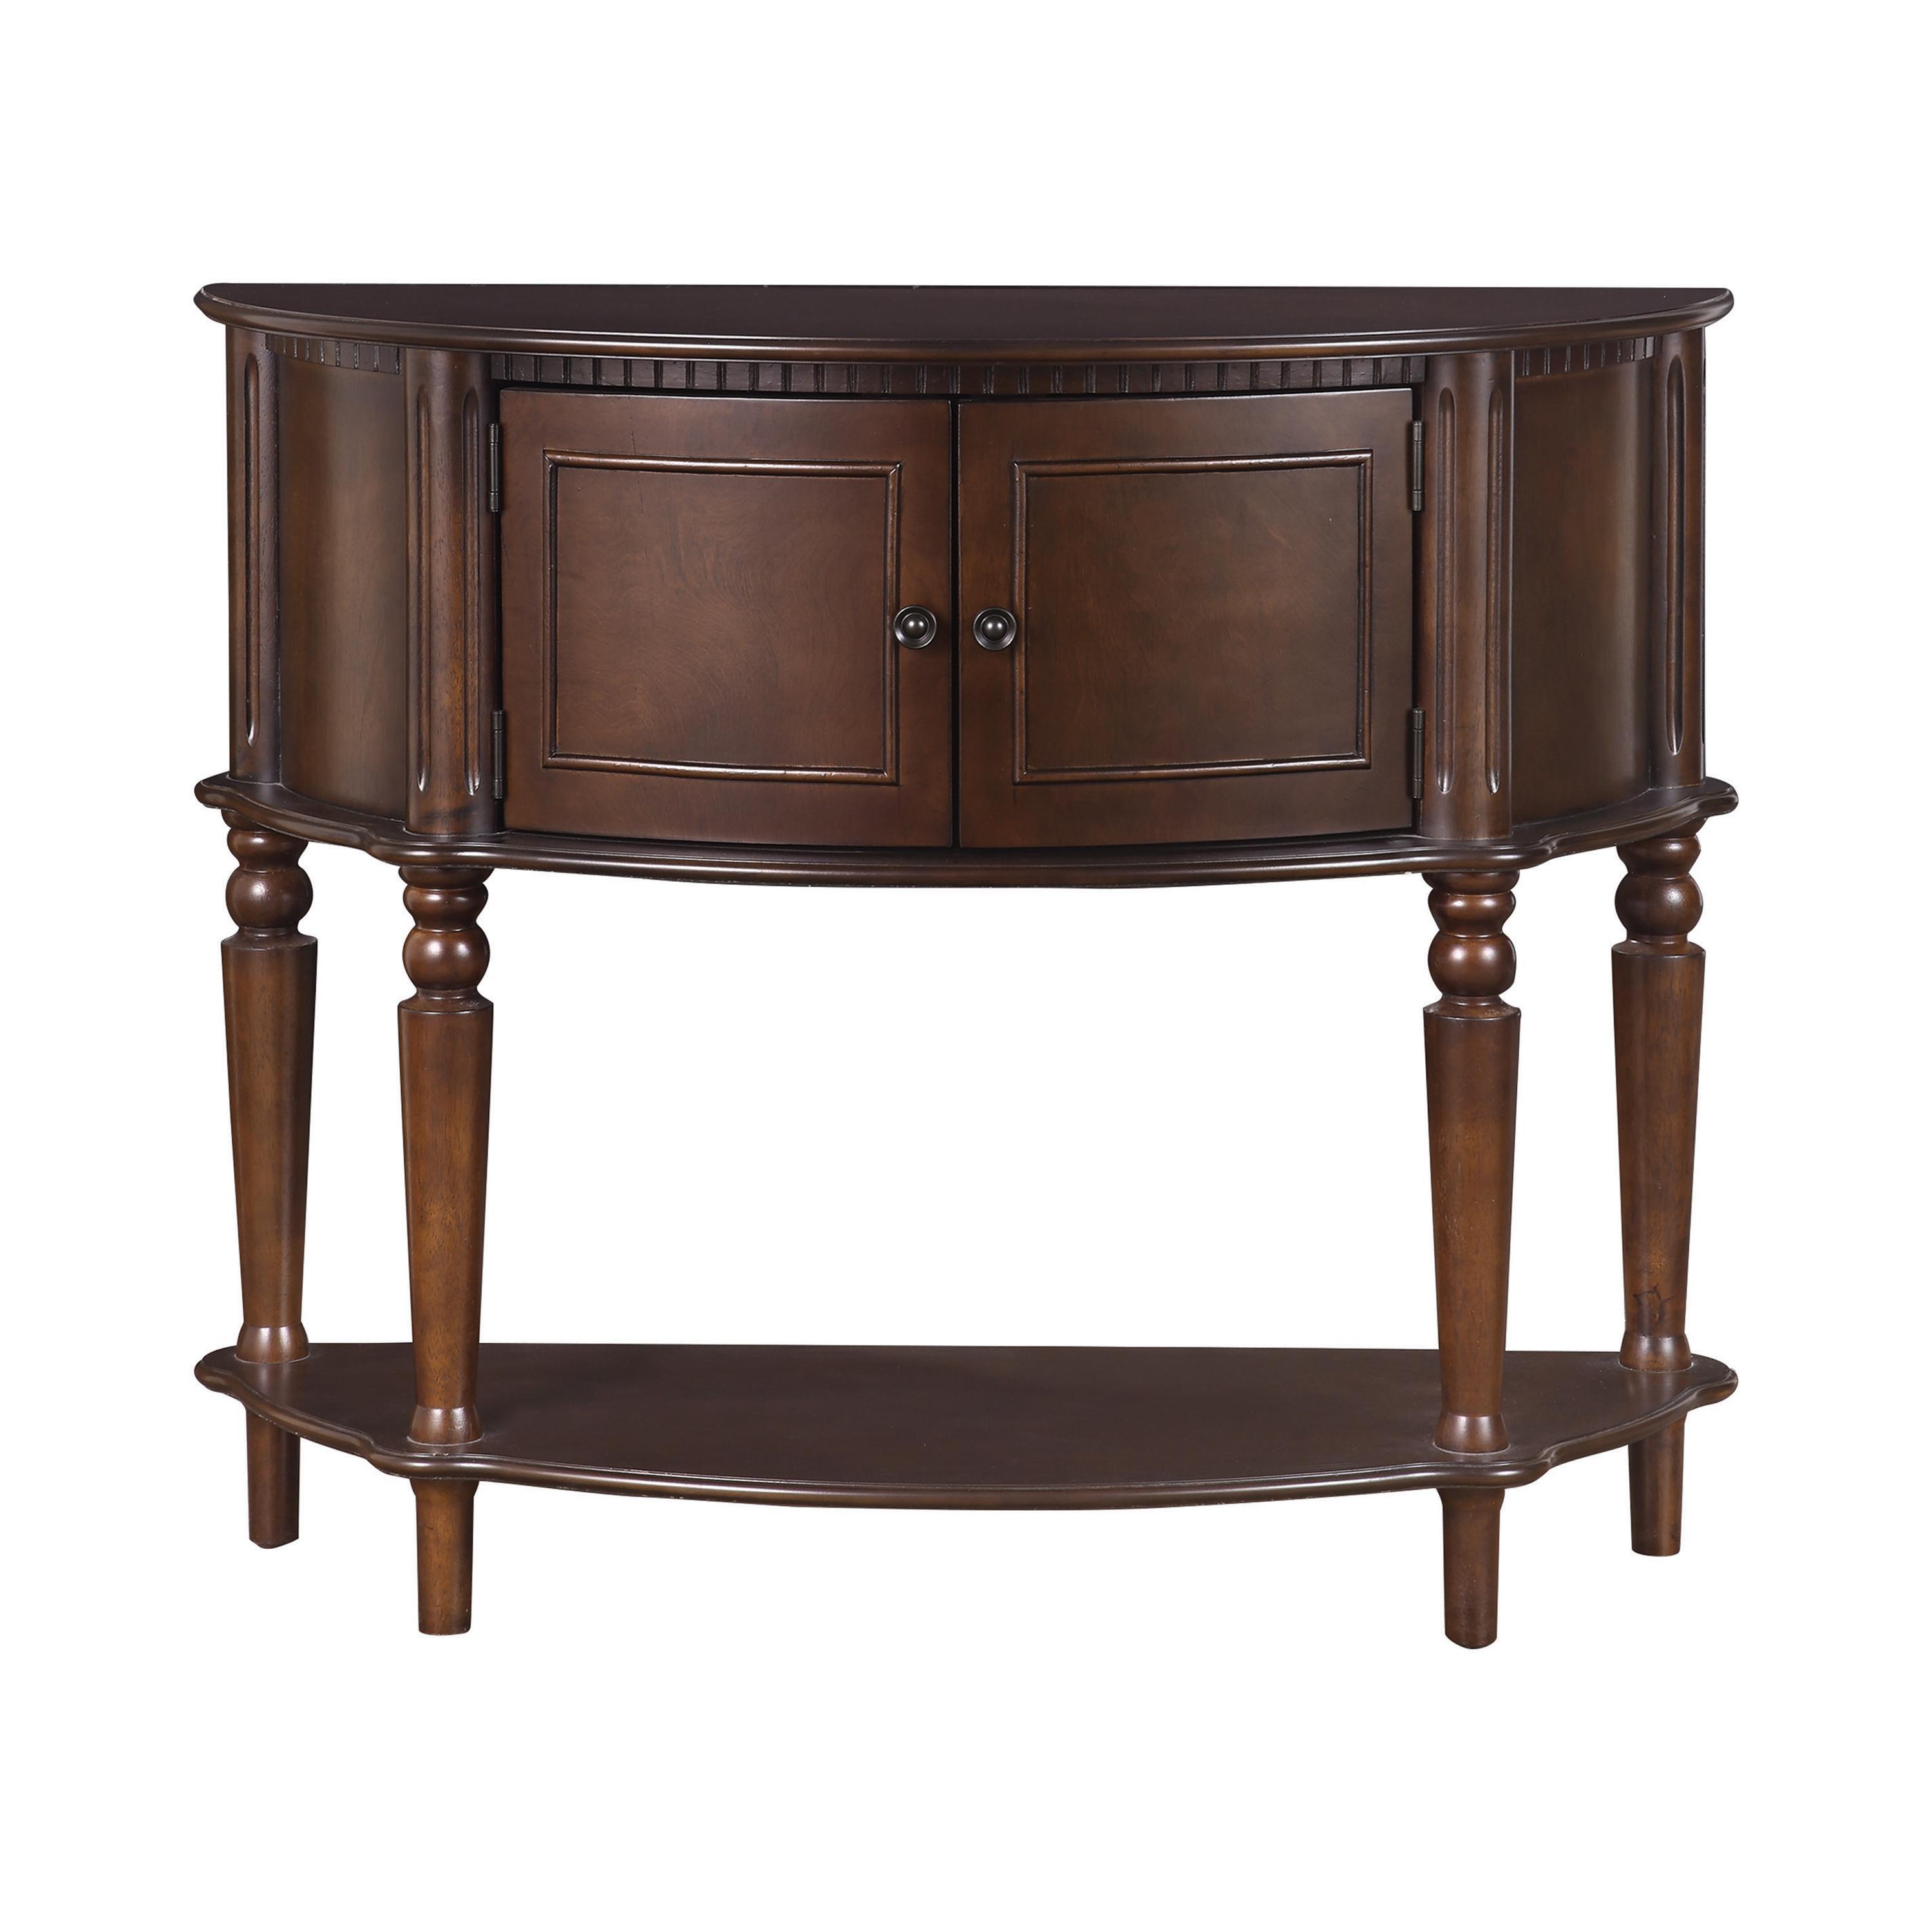 Traditional Console Table 950059 950059 in Brown 